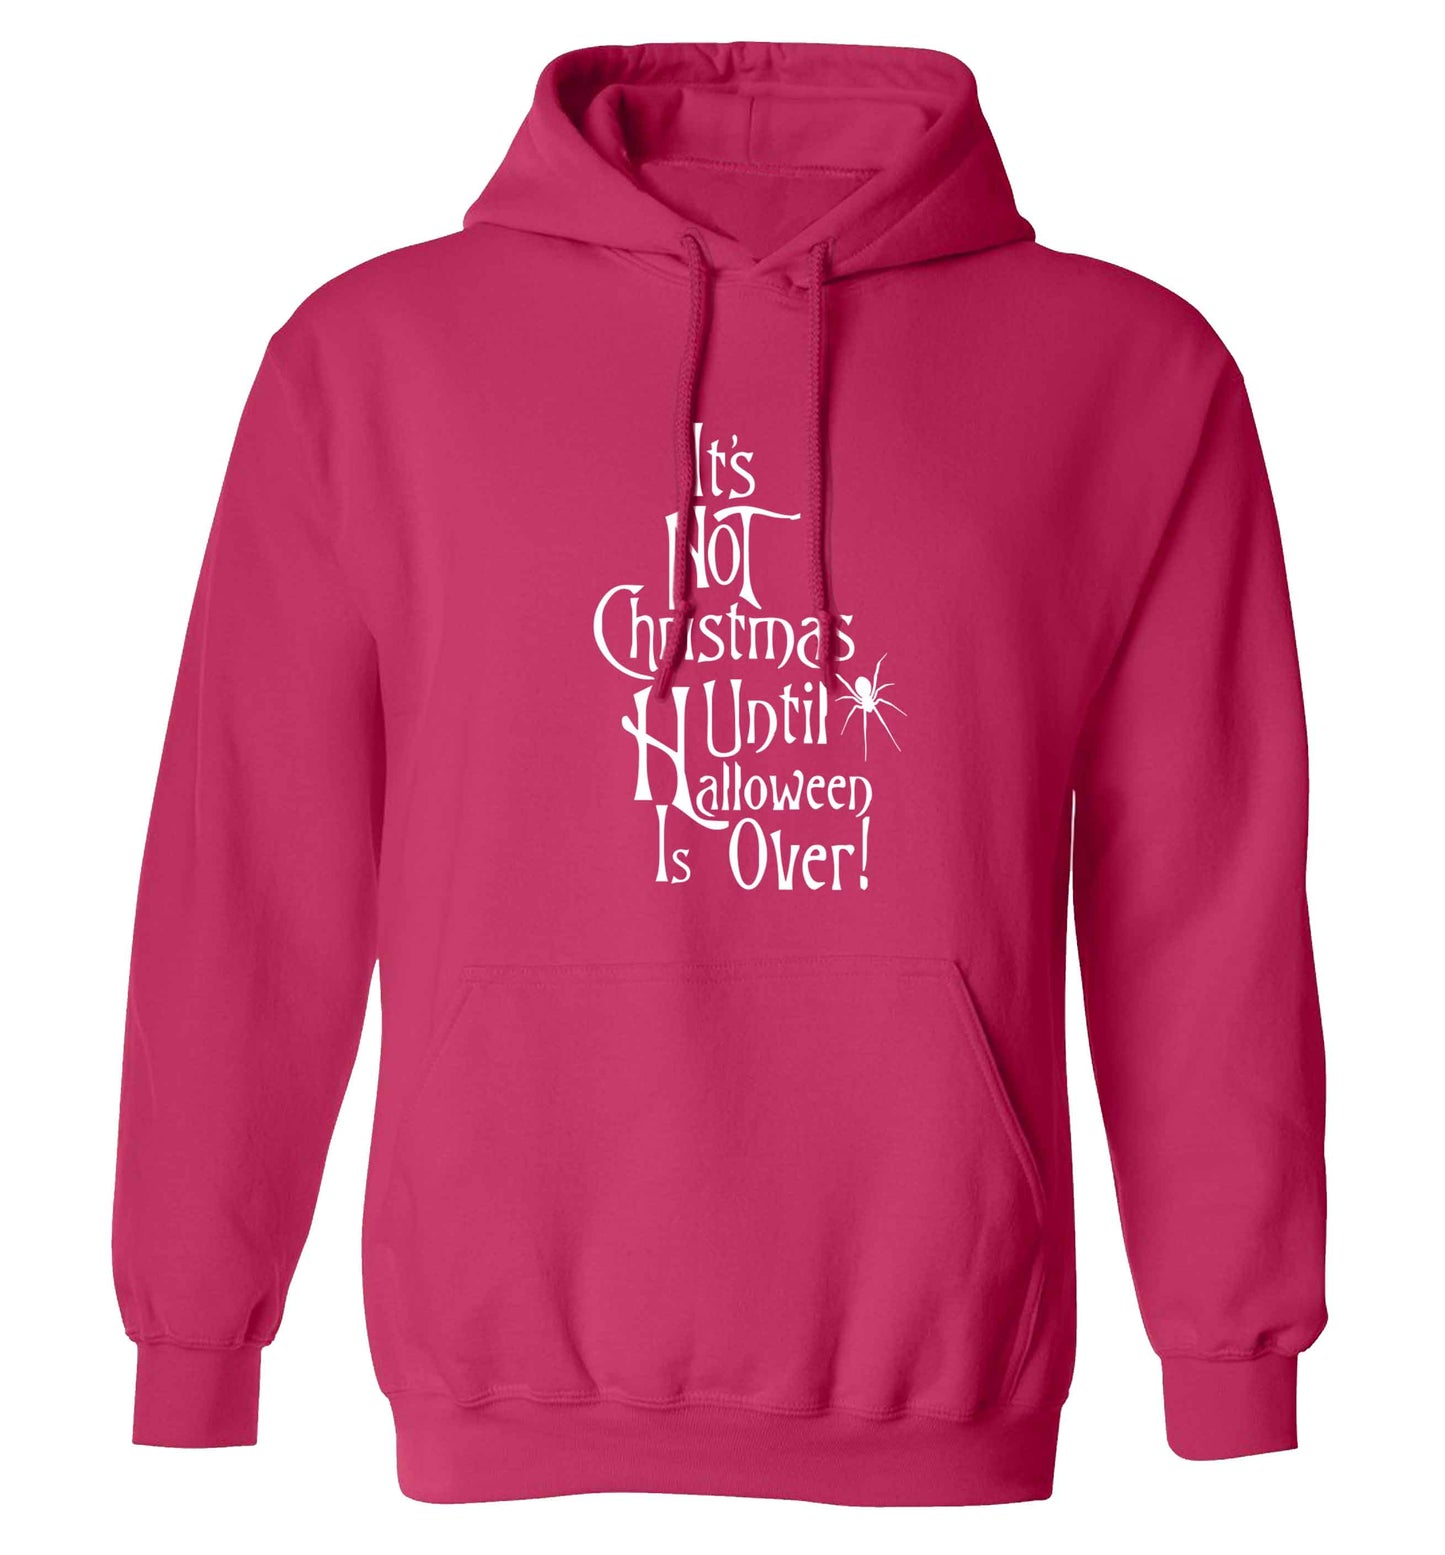 It's not Christmas until Halloween is over adults unisex pink hoodie 2XL